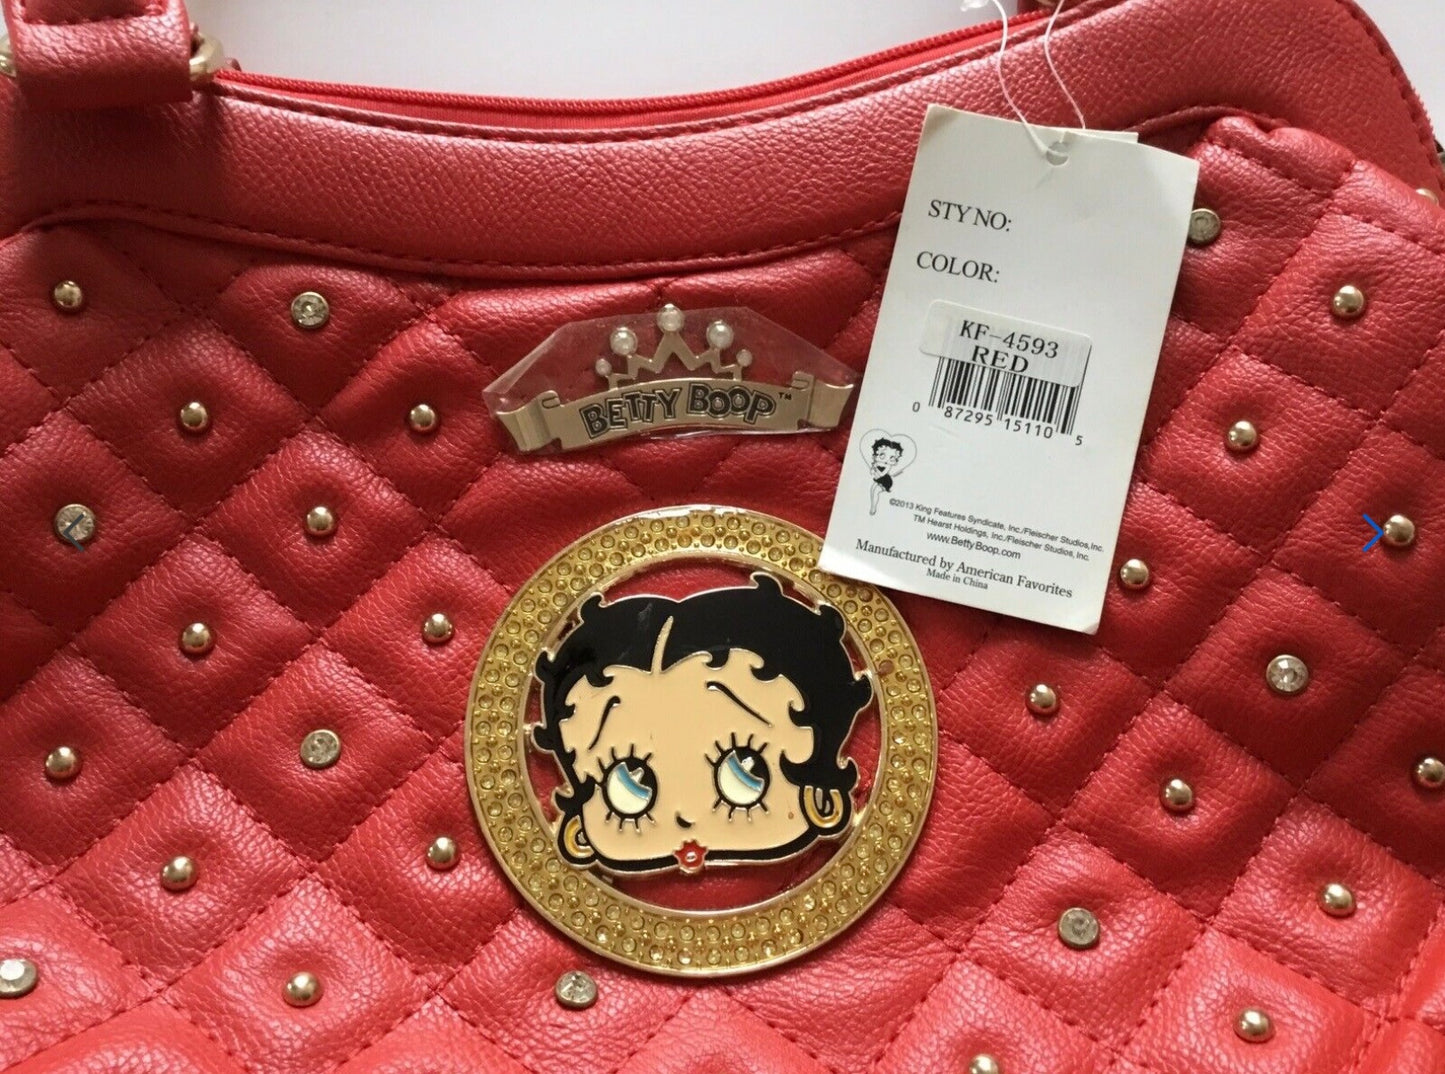 Betty Boop Classy Red Large Bag KF-4593RED with Gold beads and Emblem 39 x 29cms